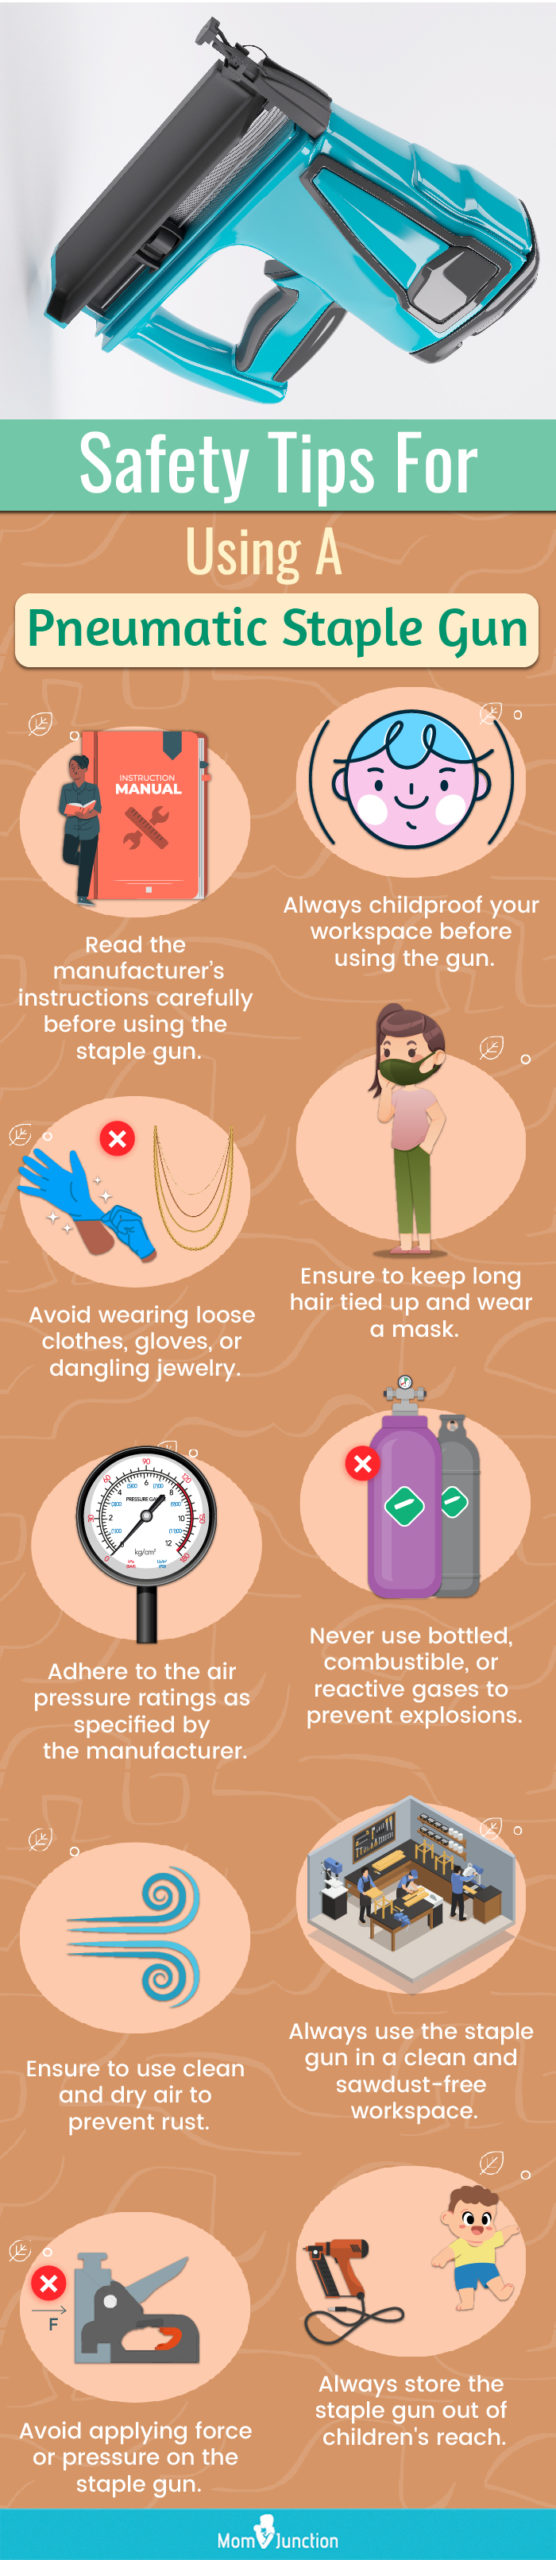 Safety Tips For Using A Pneumatic Staple Gun(infographic)